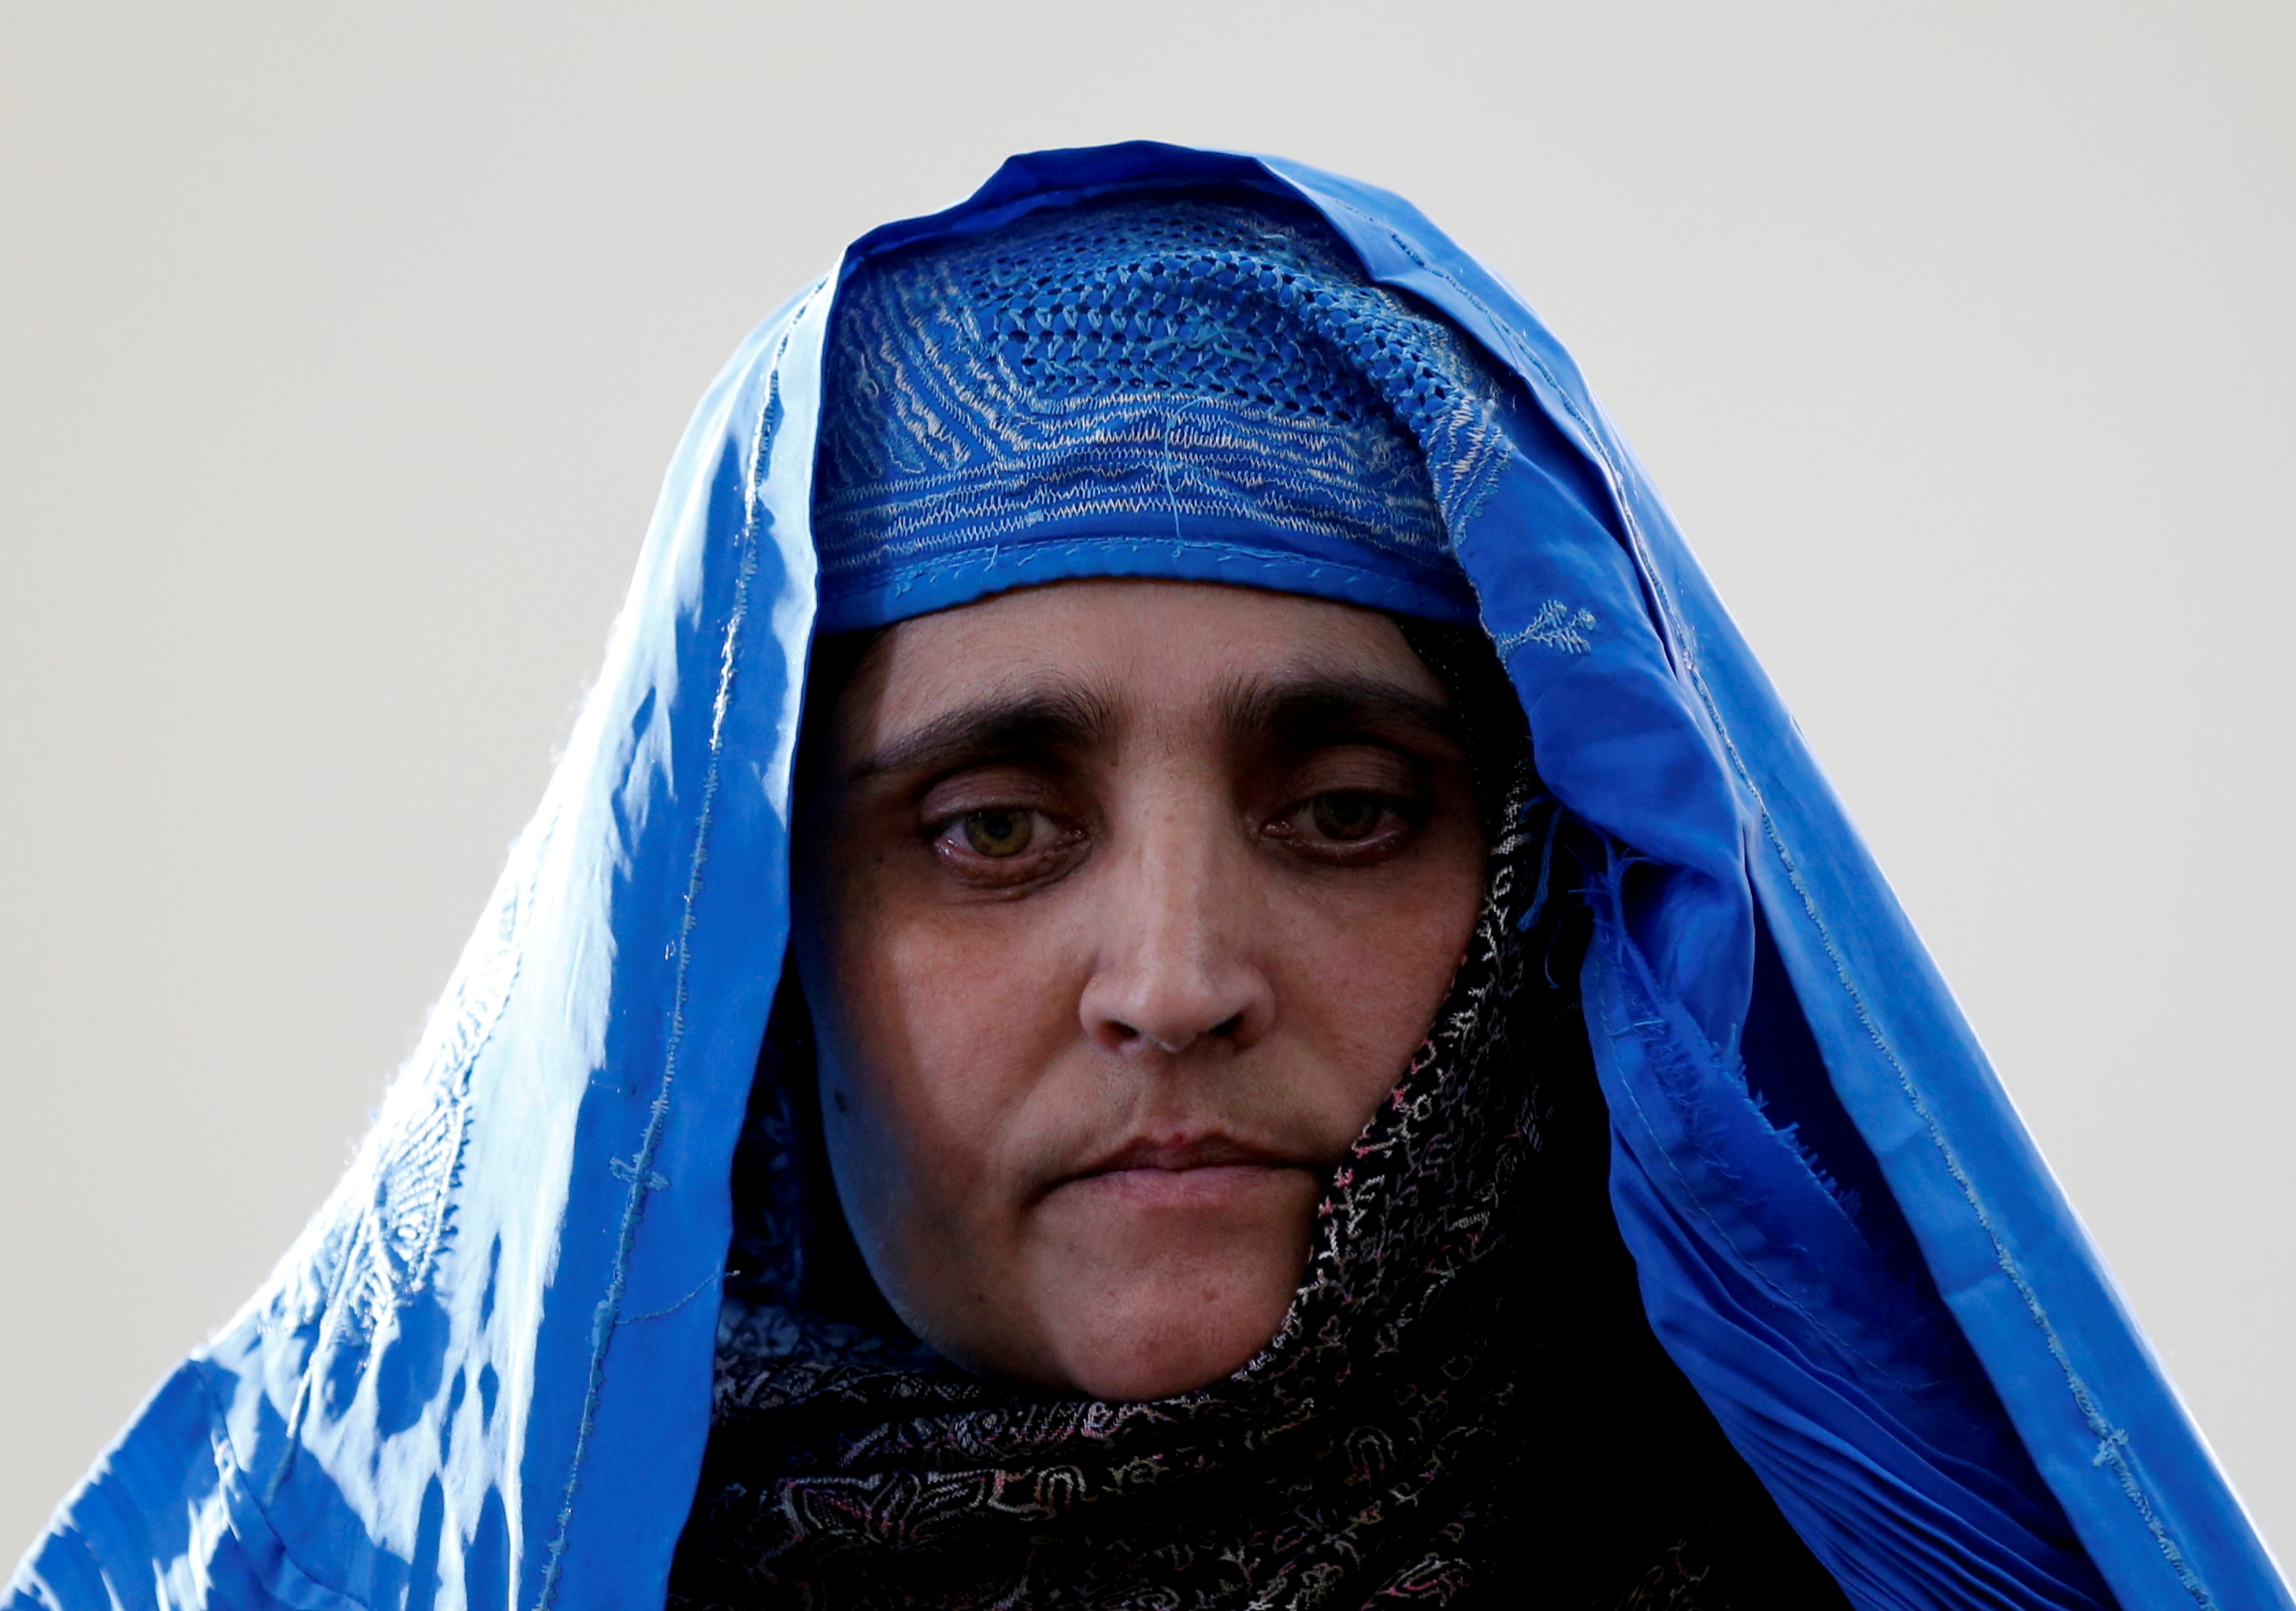 Sharbat Gula, the green-eyed "Afghan Girl" whose 1985 photo in National Geographic became a symbol of her country's wars, arrives to meet with Afghanistan's President Ashraf Ghani in Kabul, Afghanistan November 9, 2016. REUTERS/Stringer/File Photo 